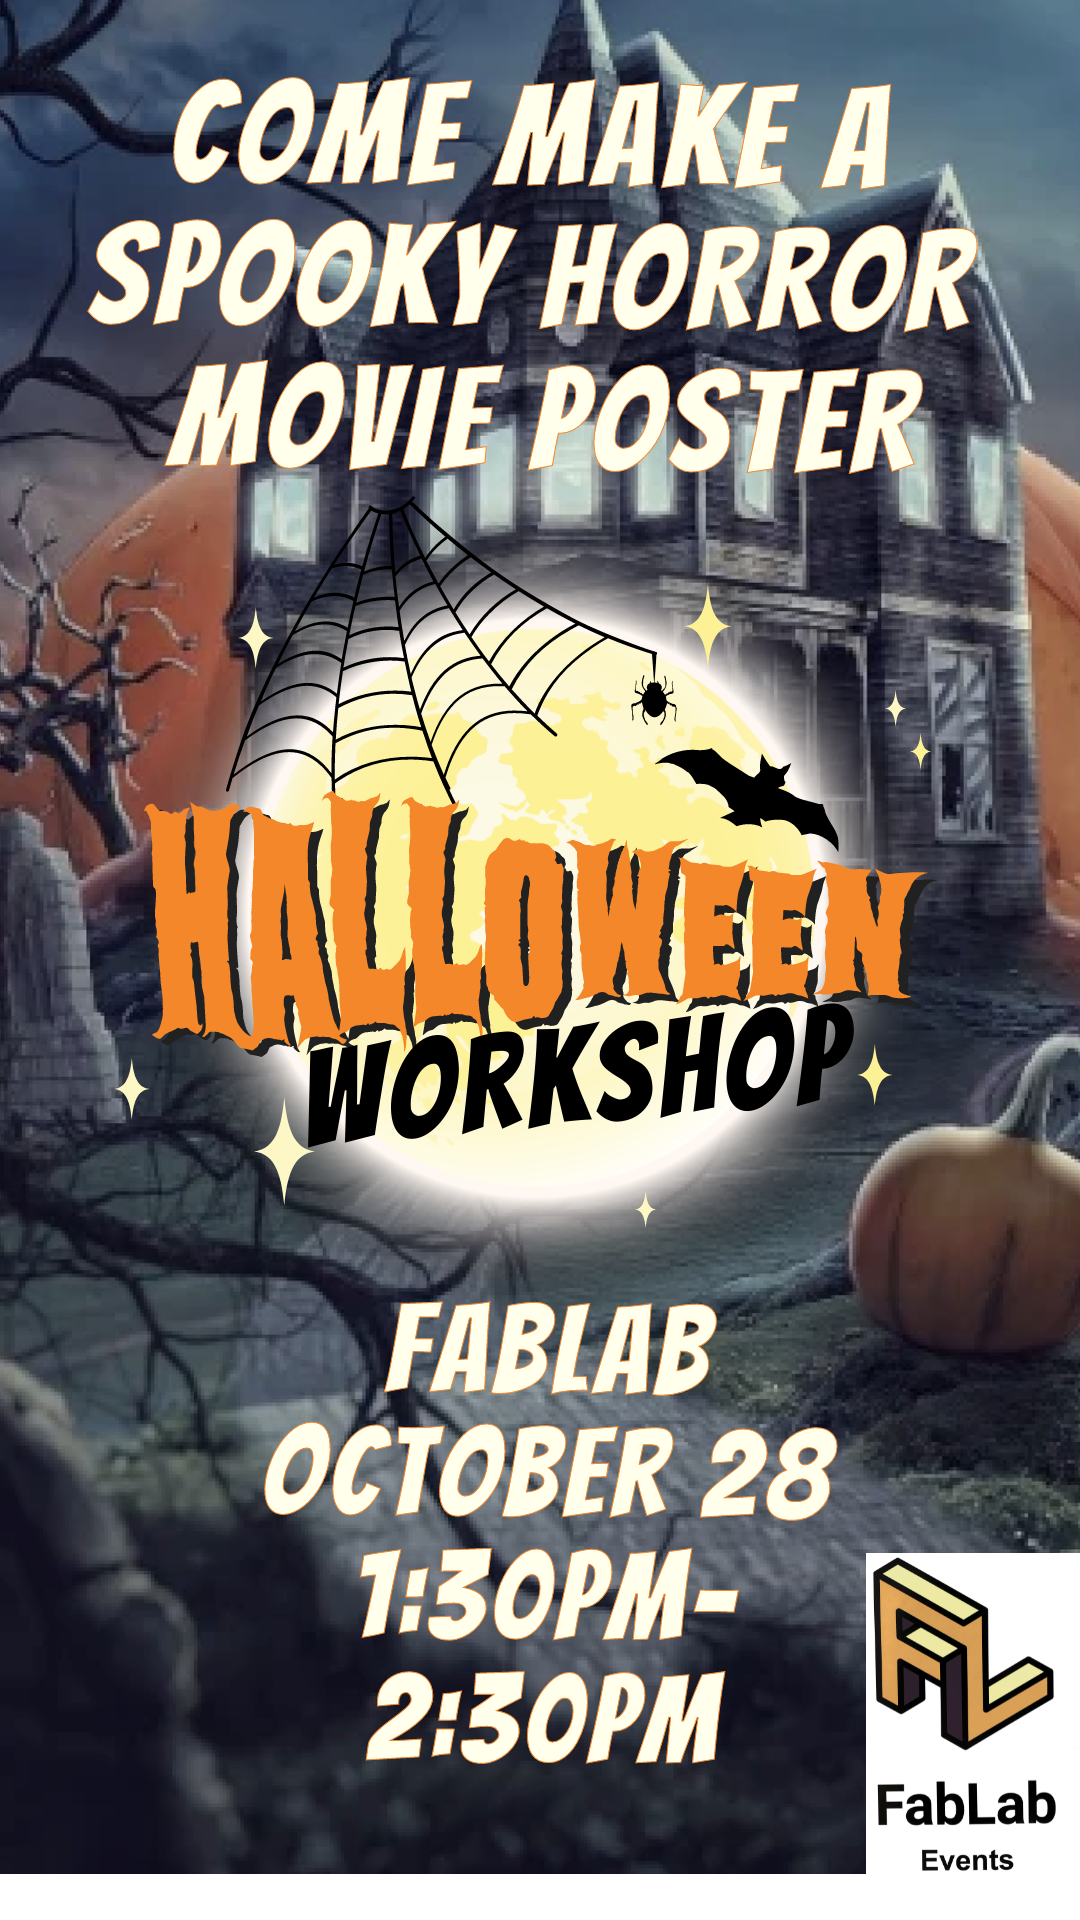 Background is a haunted house. Foreground reads "Halloween workshop" in front of a full moon with bat and spider web